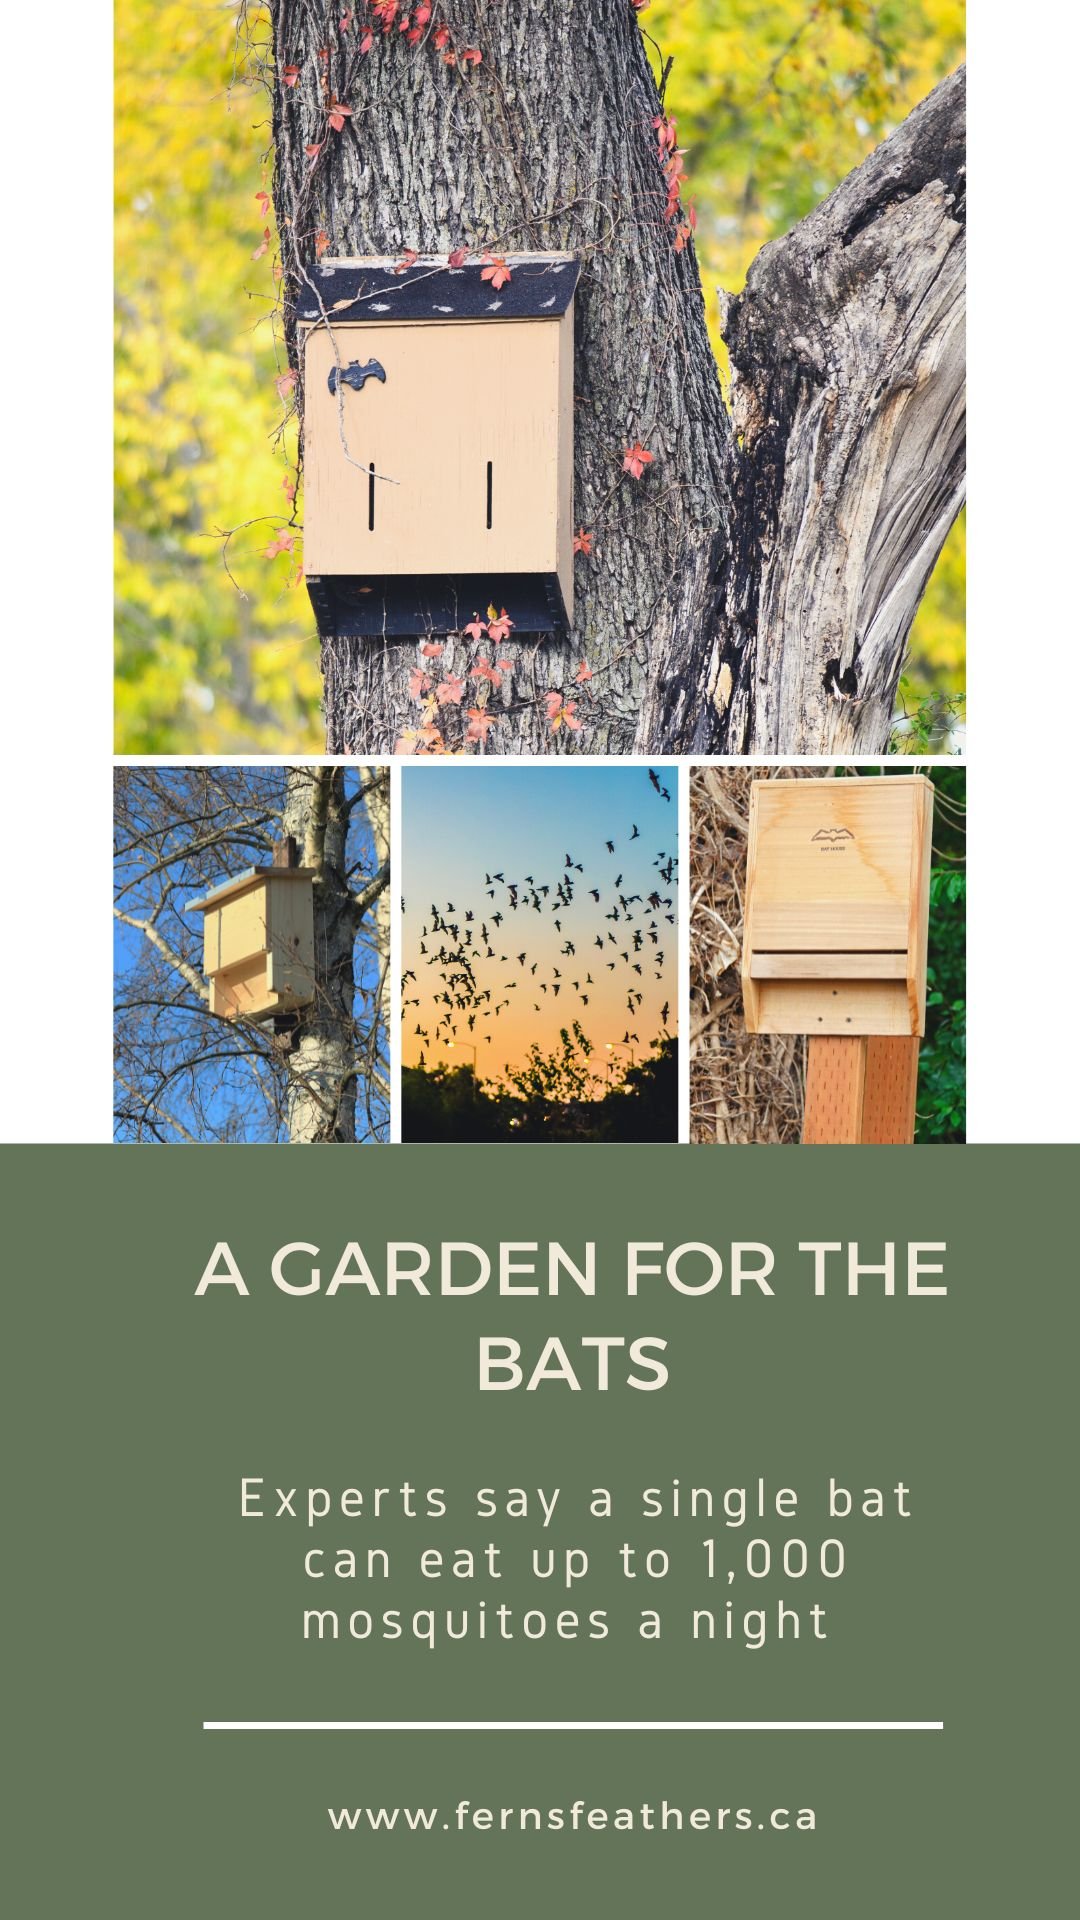 Graphic showing various bat houses